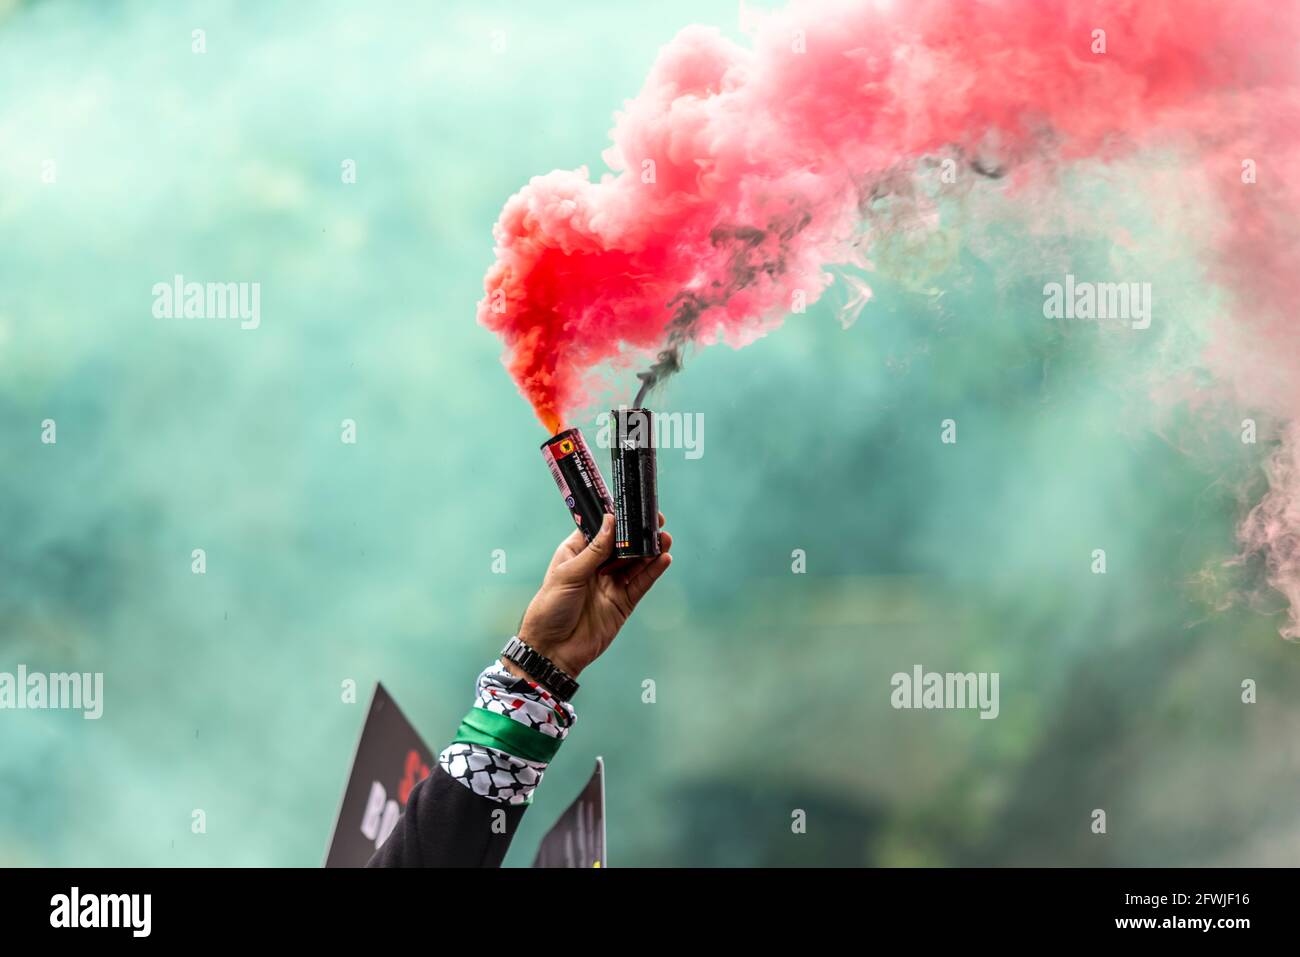 Hand of a protester at National Demonstration for Palestine, Free Palestine, in London, UK letting of red and green flares, their national colours Stock Photo